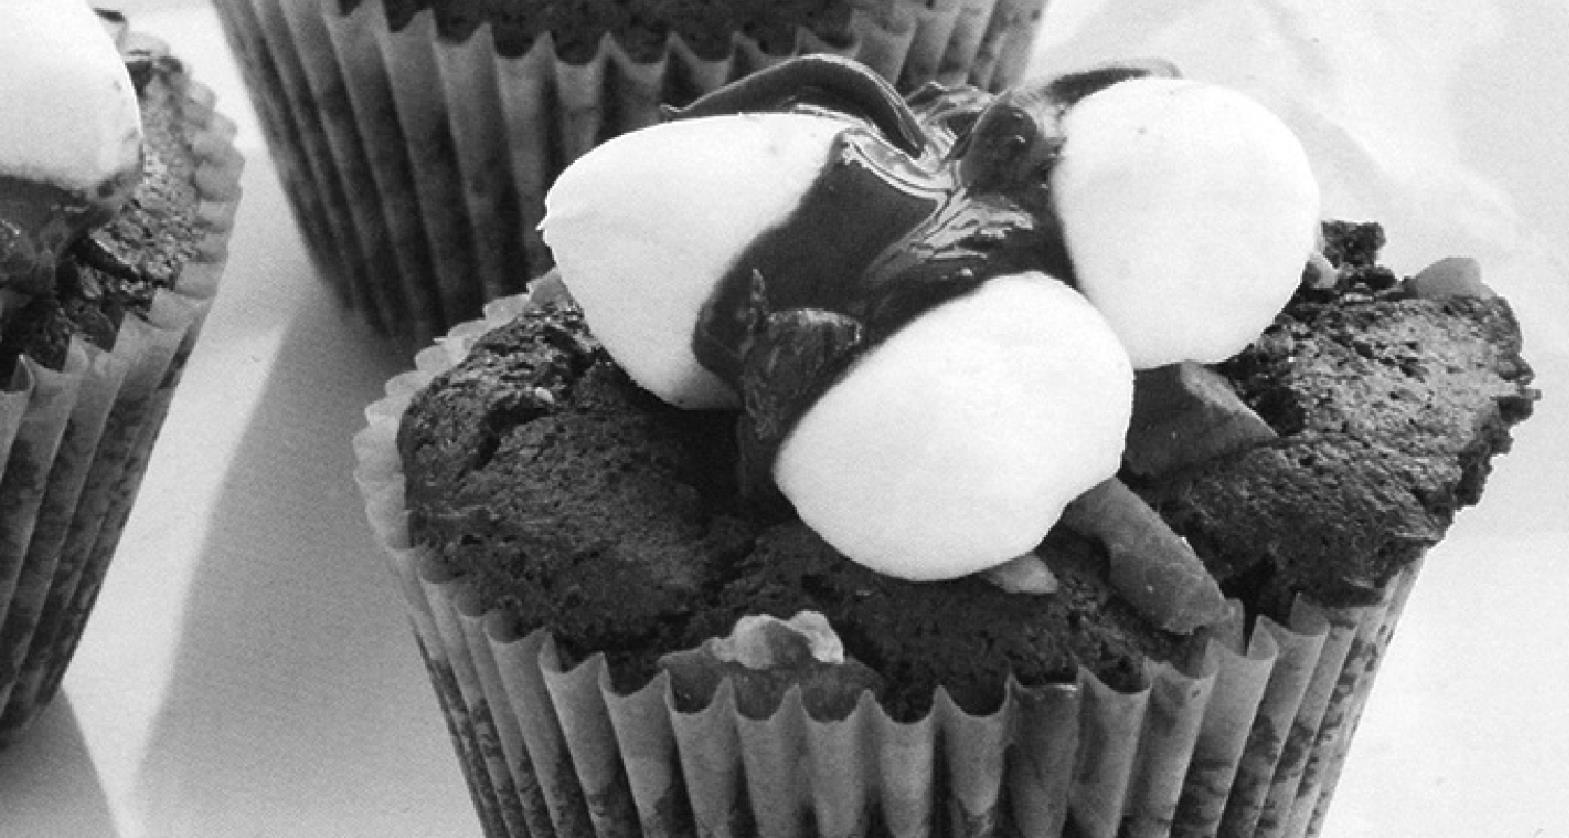 Celebrate International Hot Chocolate Day with baby cupcakes